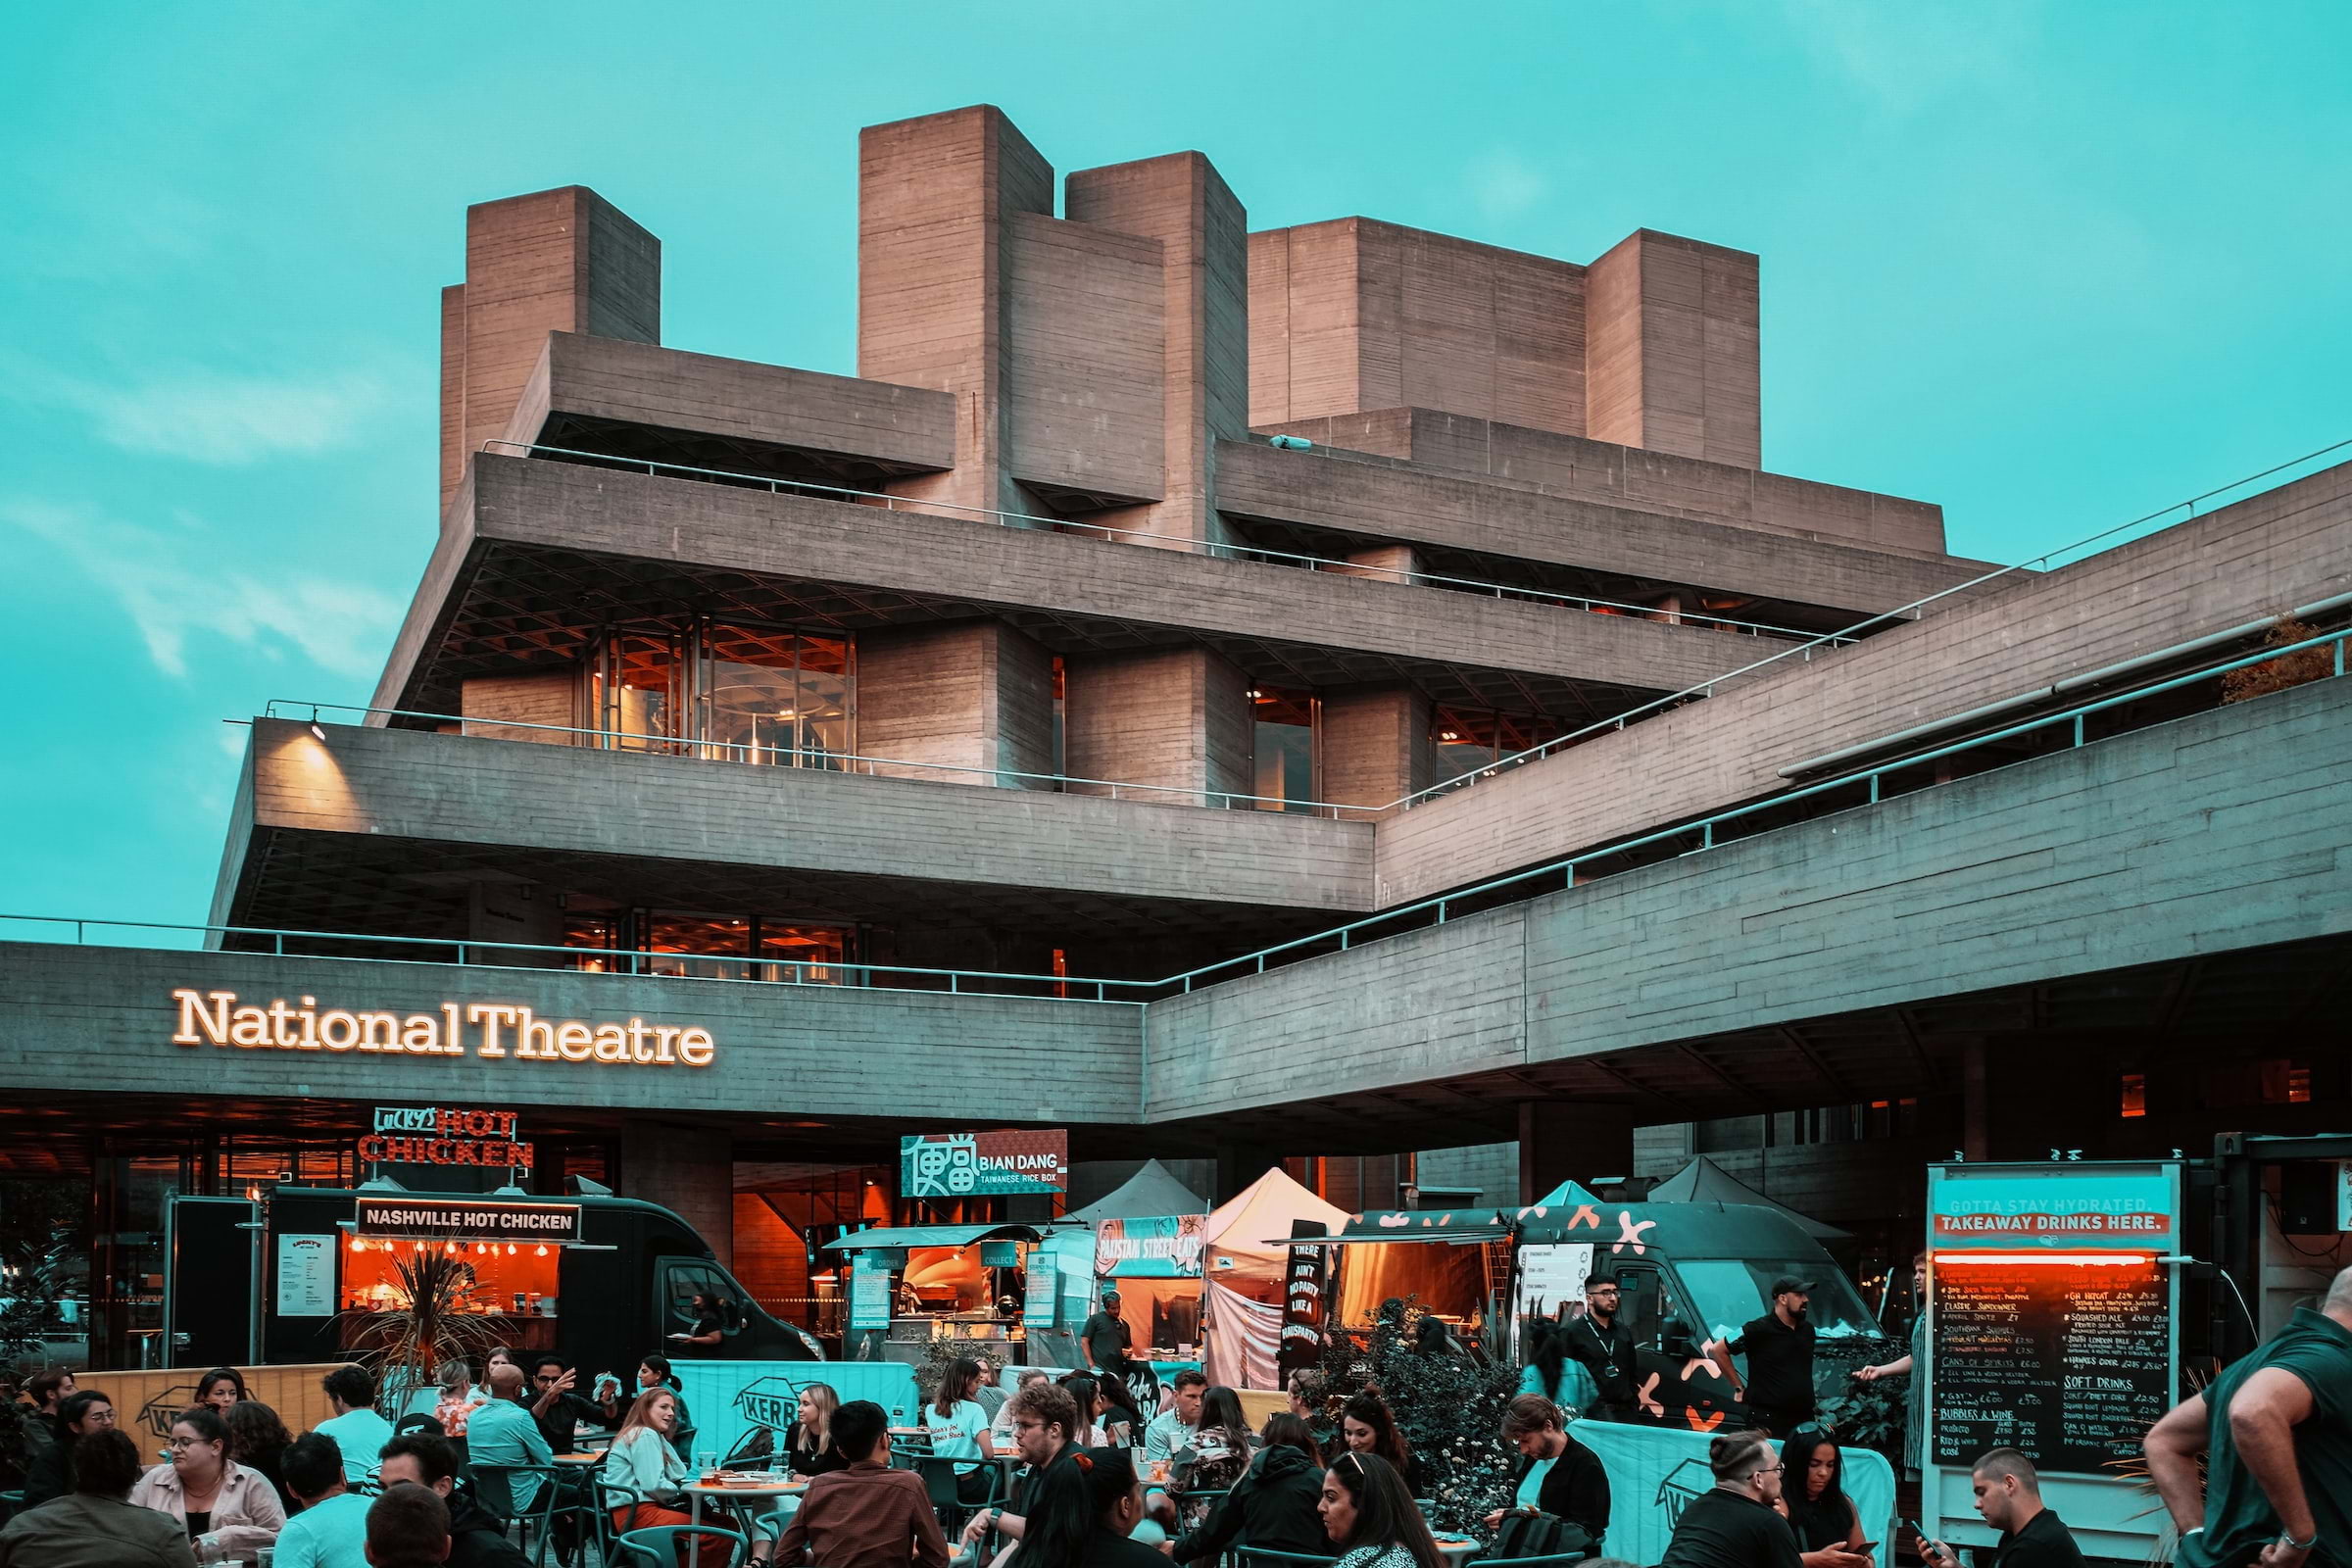 New scheme to provide free access to London theatre shows for those in need